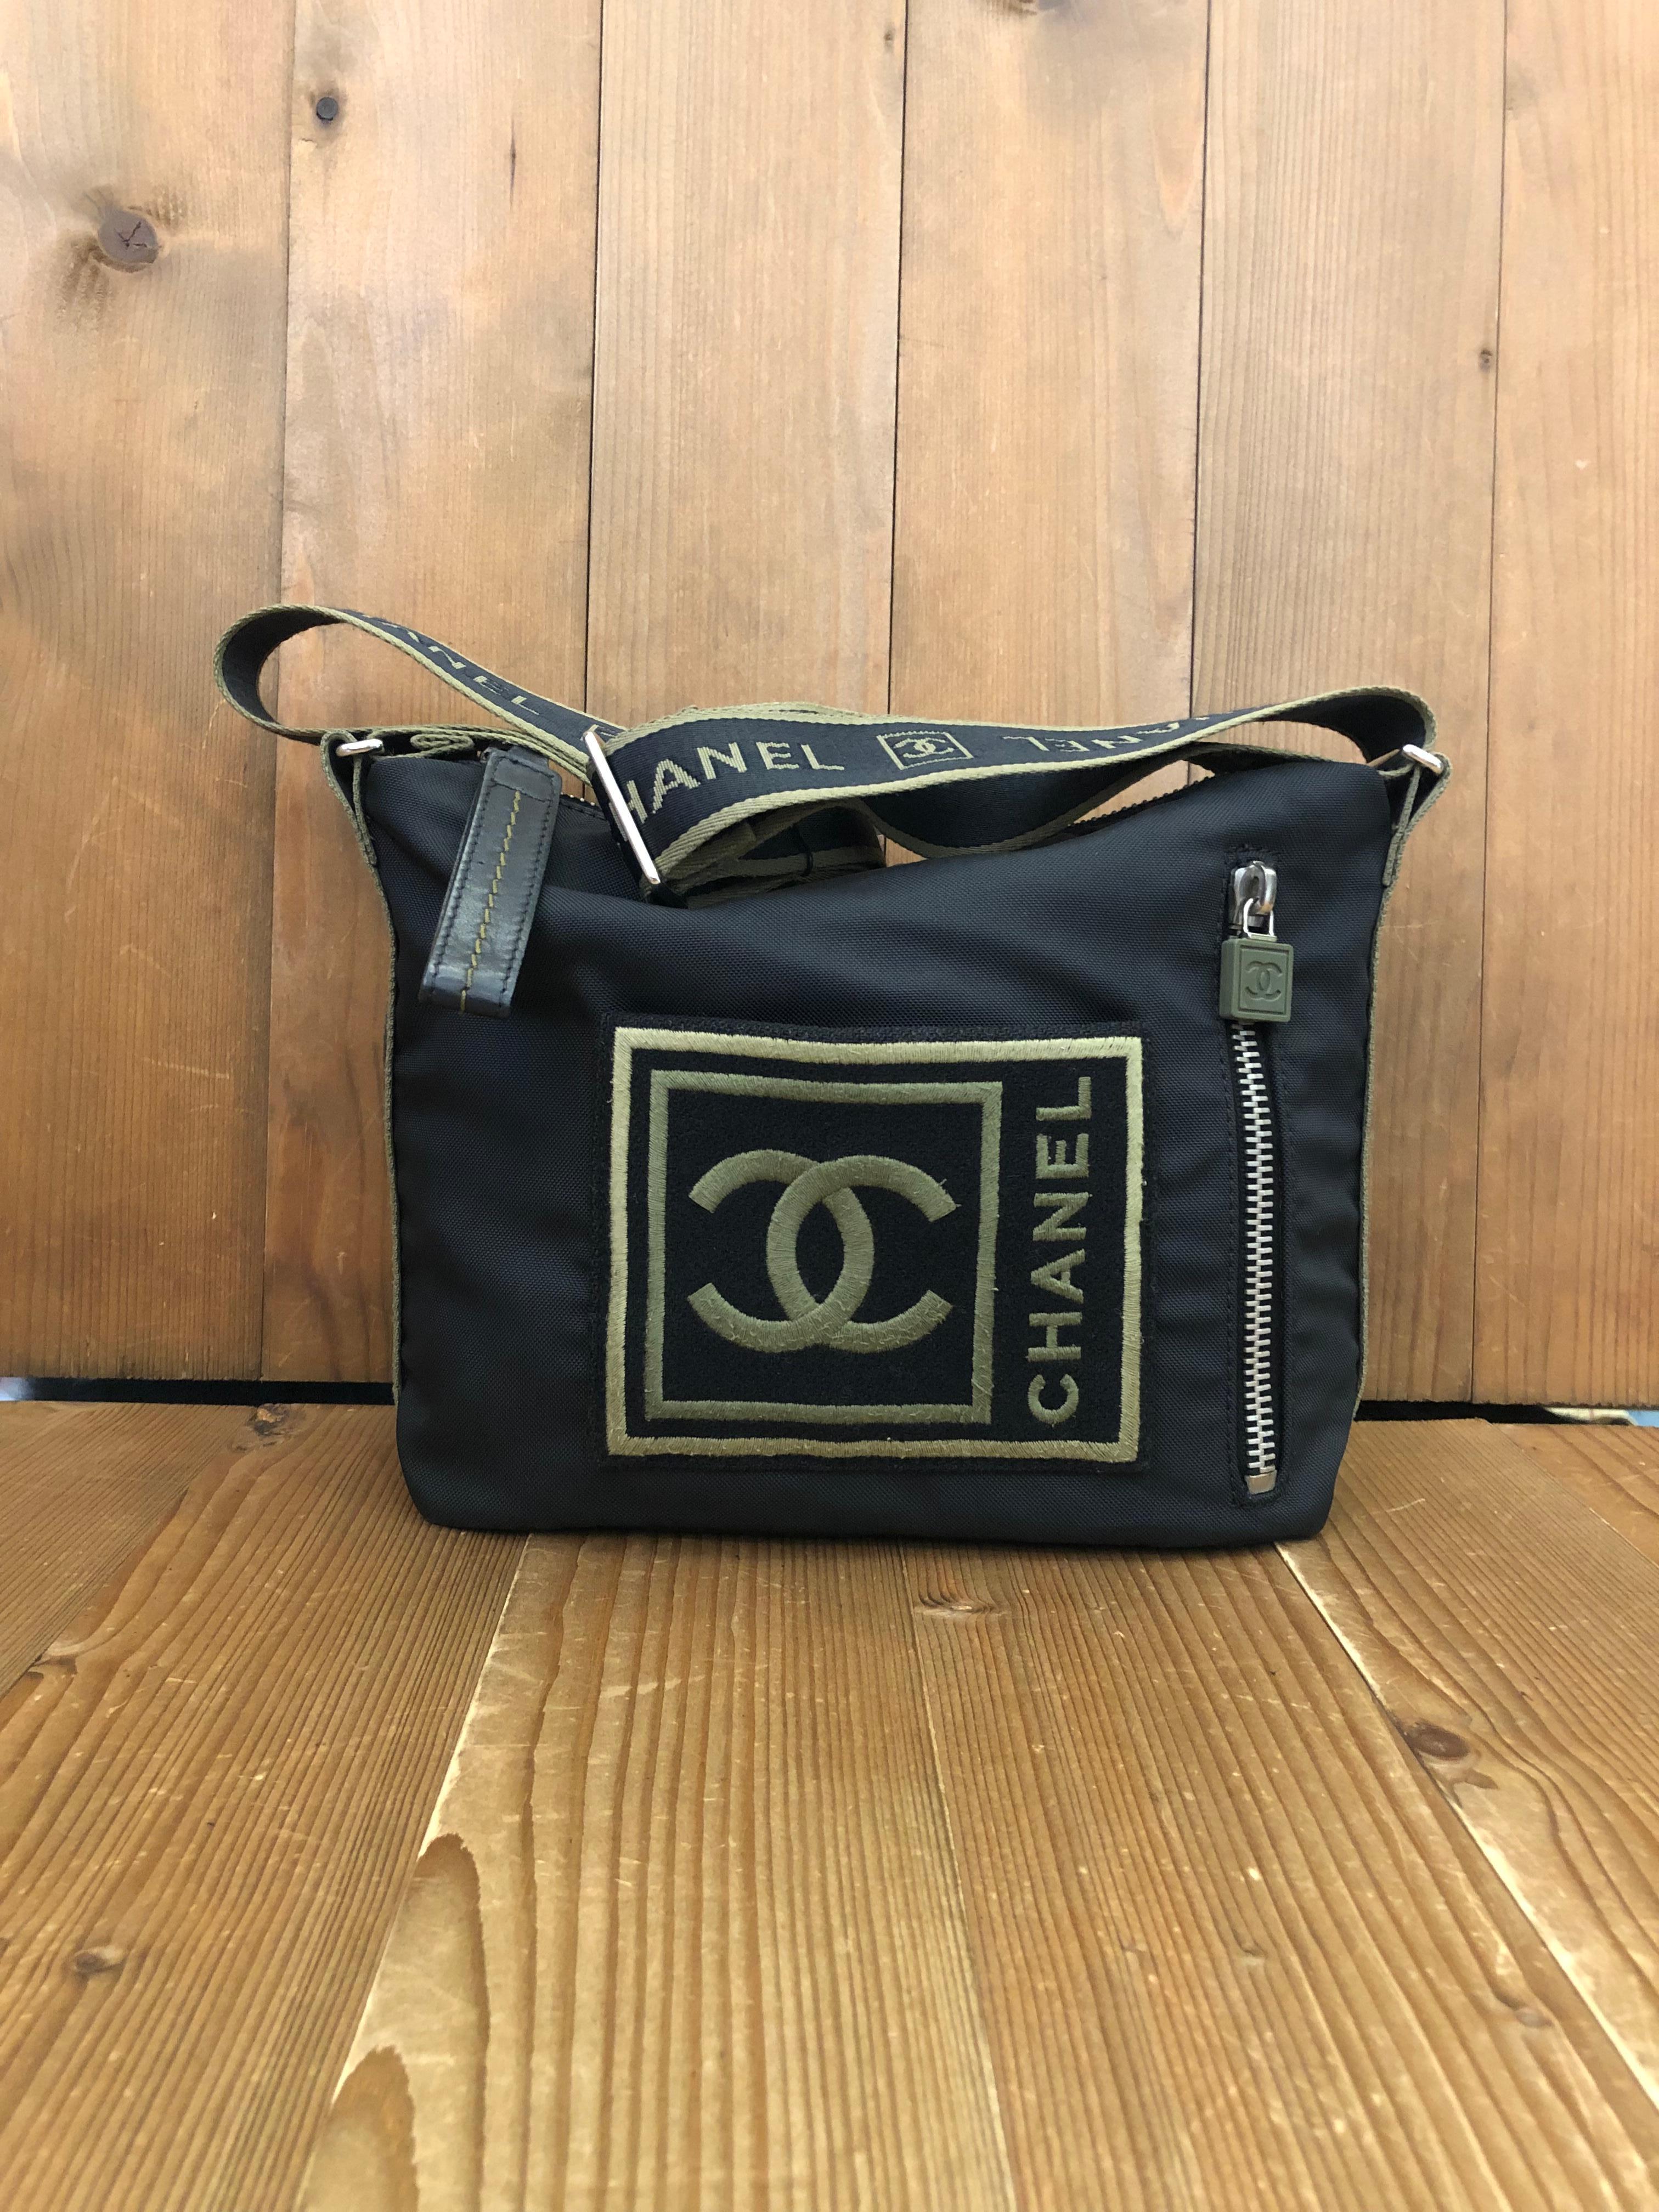 This Chanel sports messenger bag is crafted of black nylon with green embroidered CC front zippered pocket. Top zipper closure opens to a green nylon interior with one zippered pocket. The adjustable strap allows you to carry it on the shoulder or